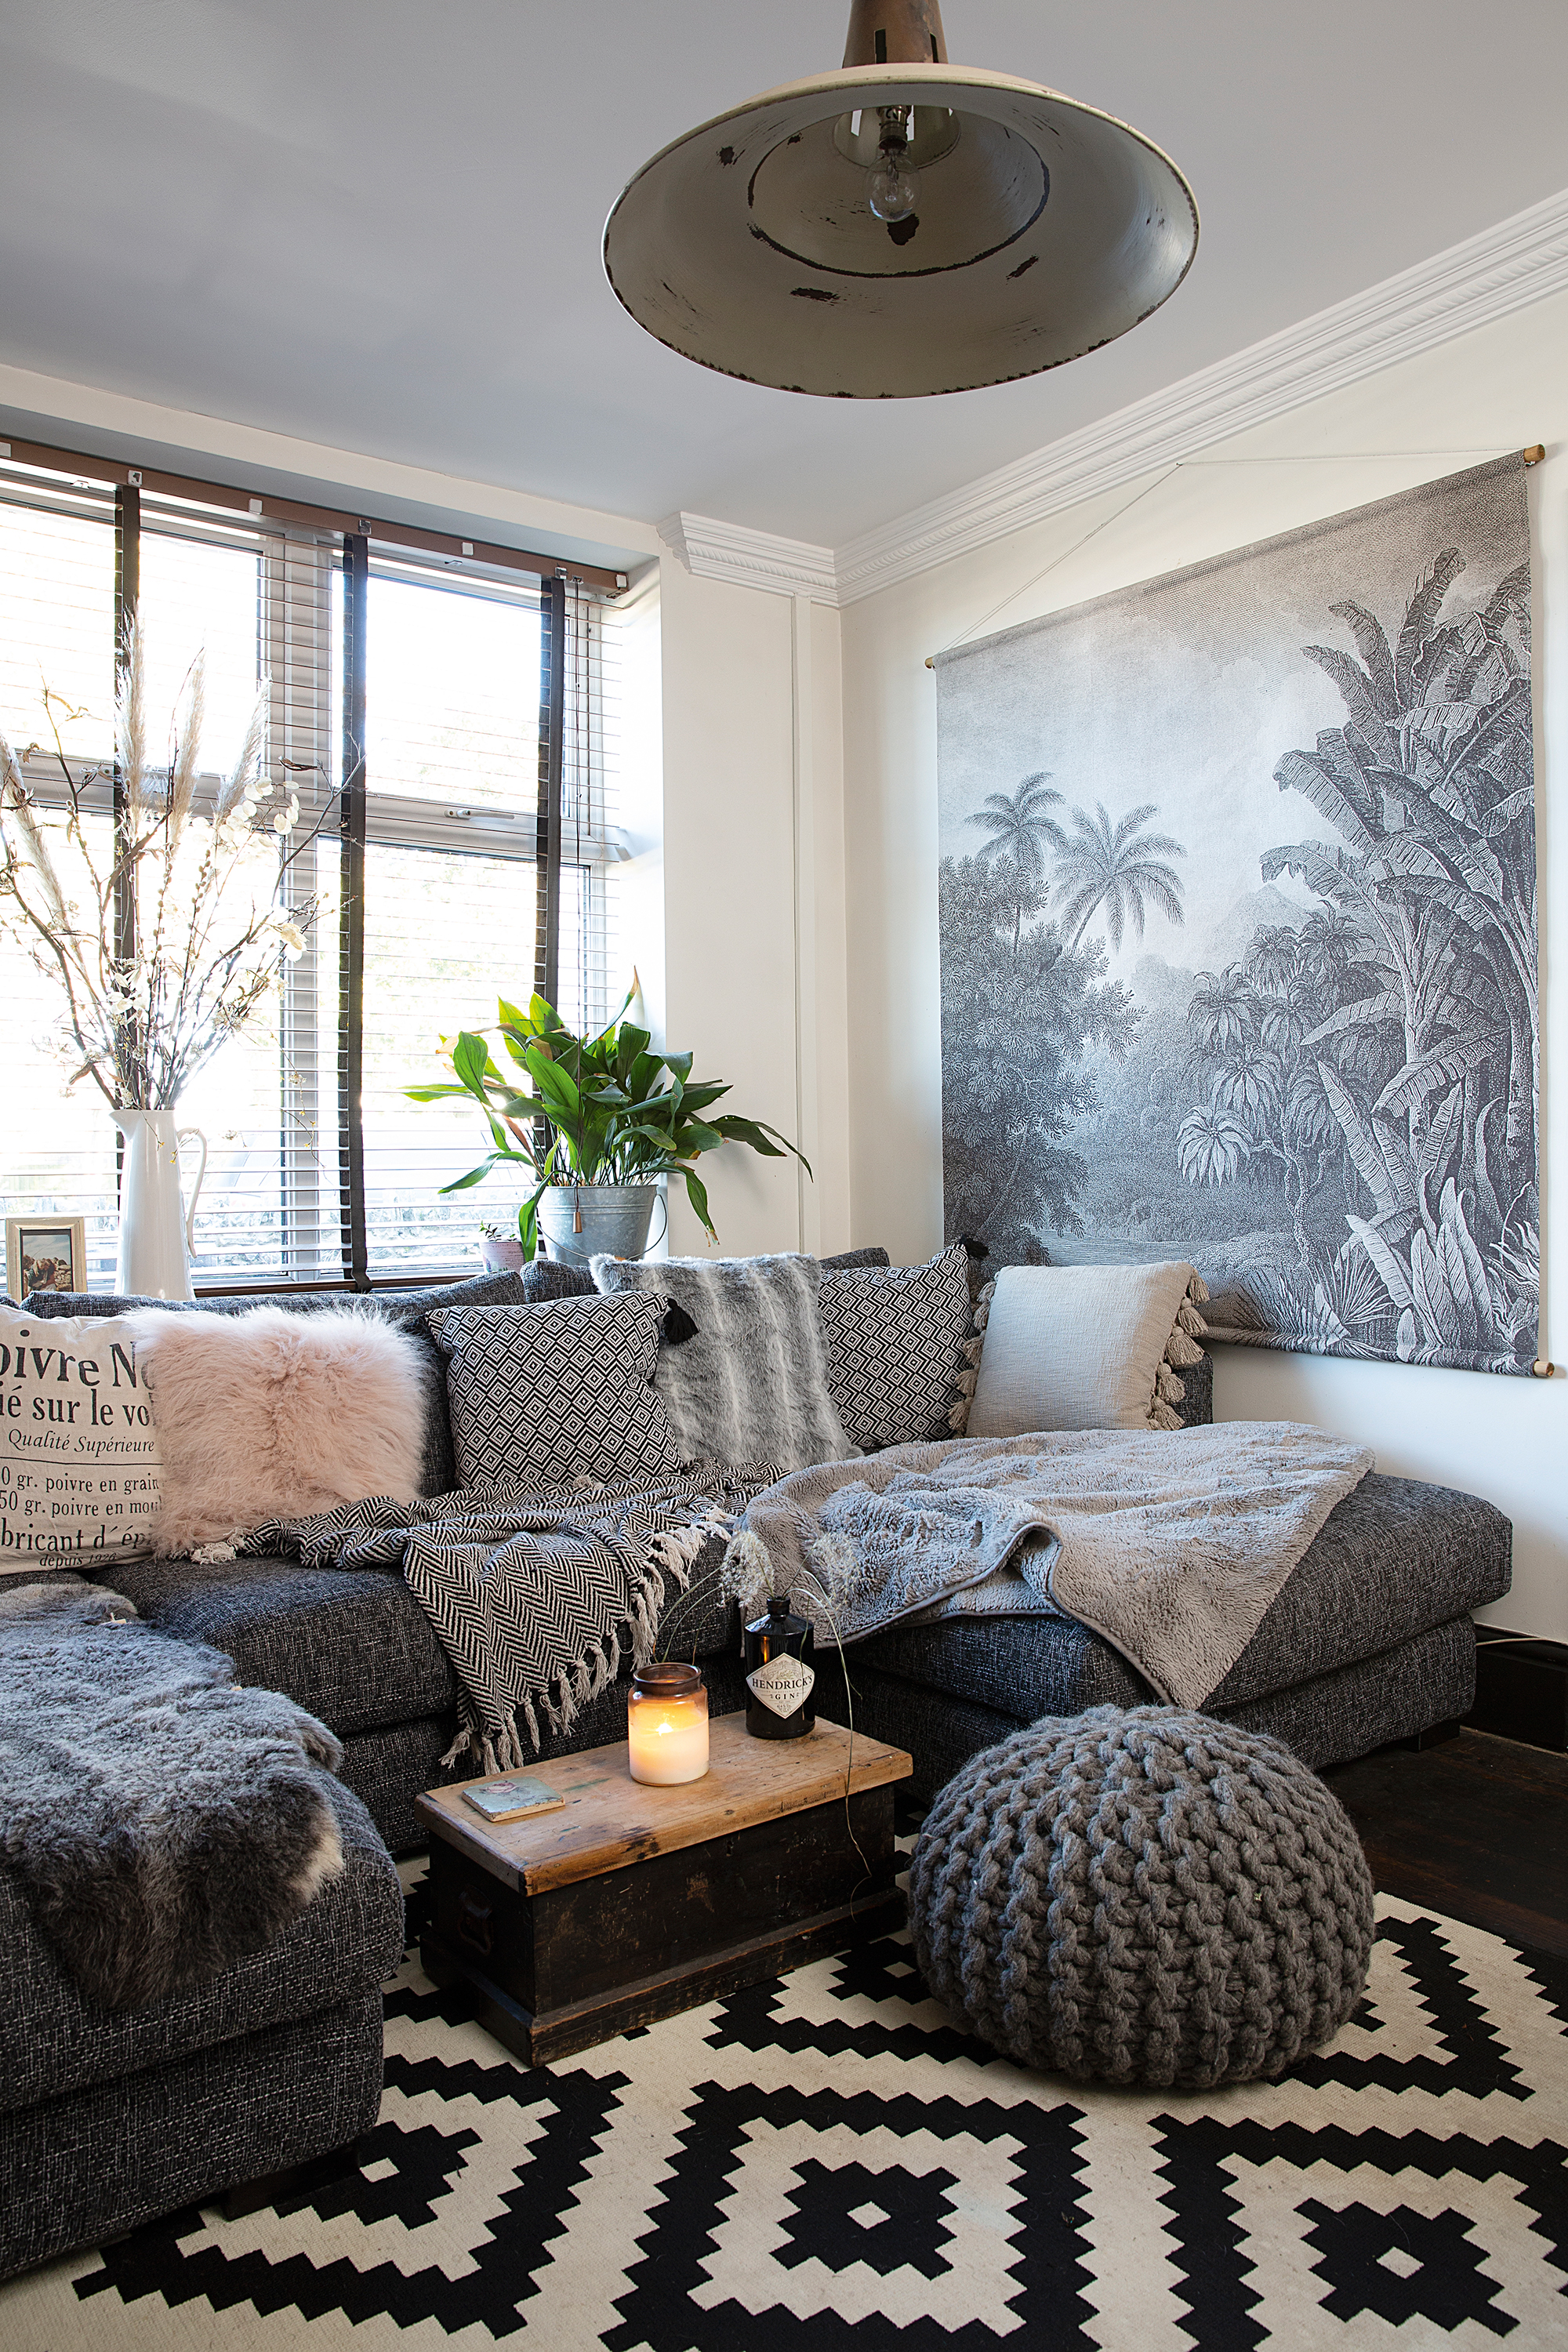 A grey living room with large corner sofa, coffee table and monochrome rug